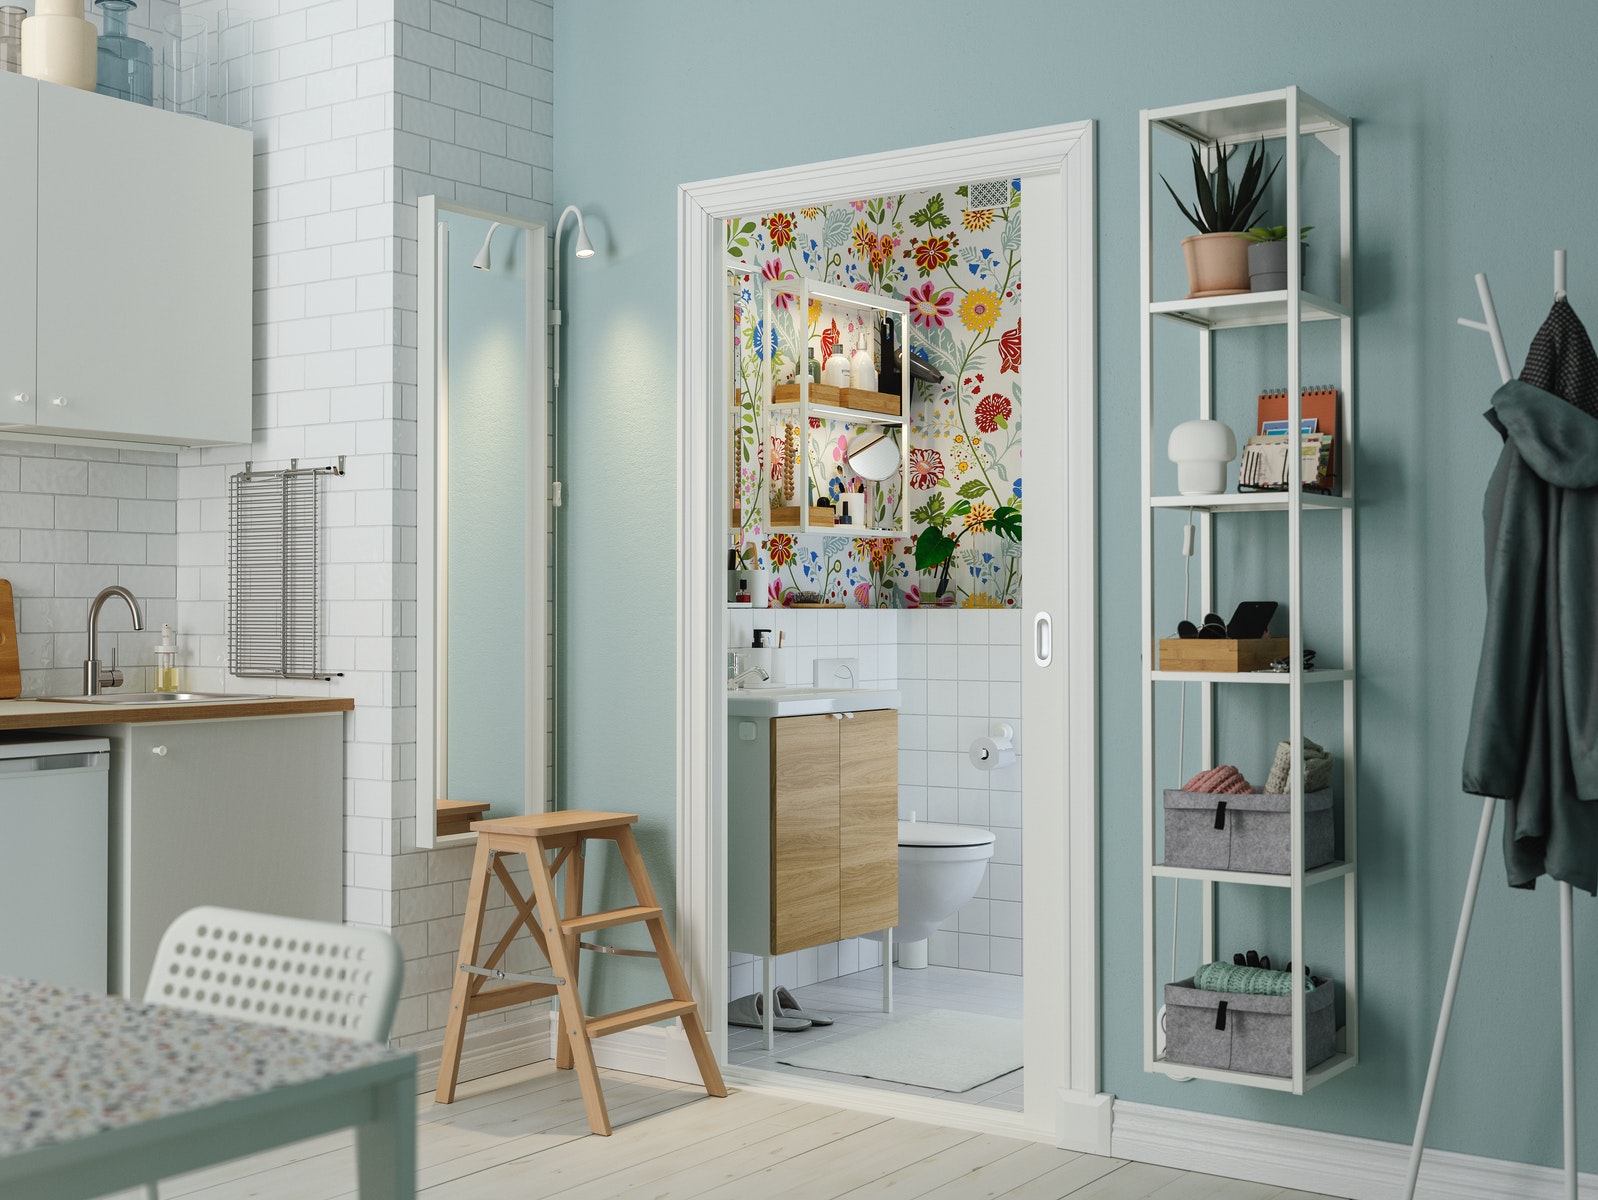 IKEA - A small bathroom that is big on style